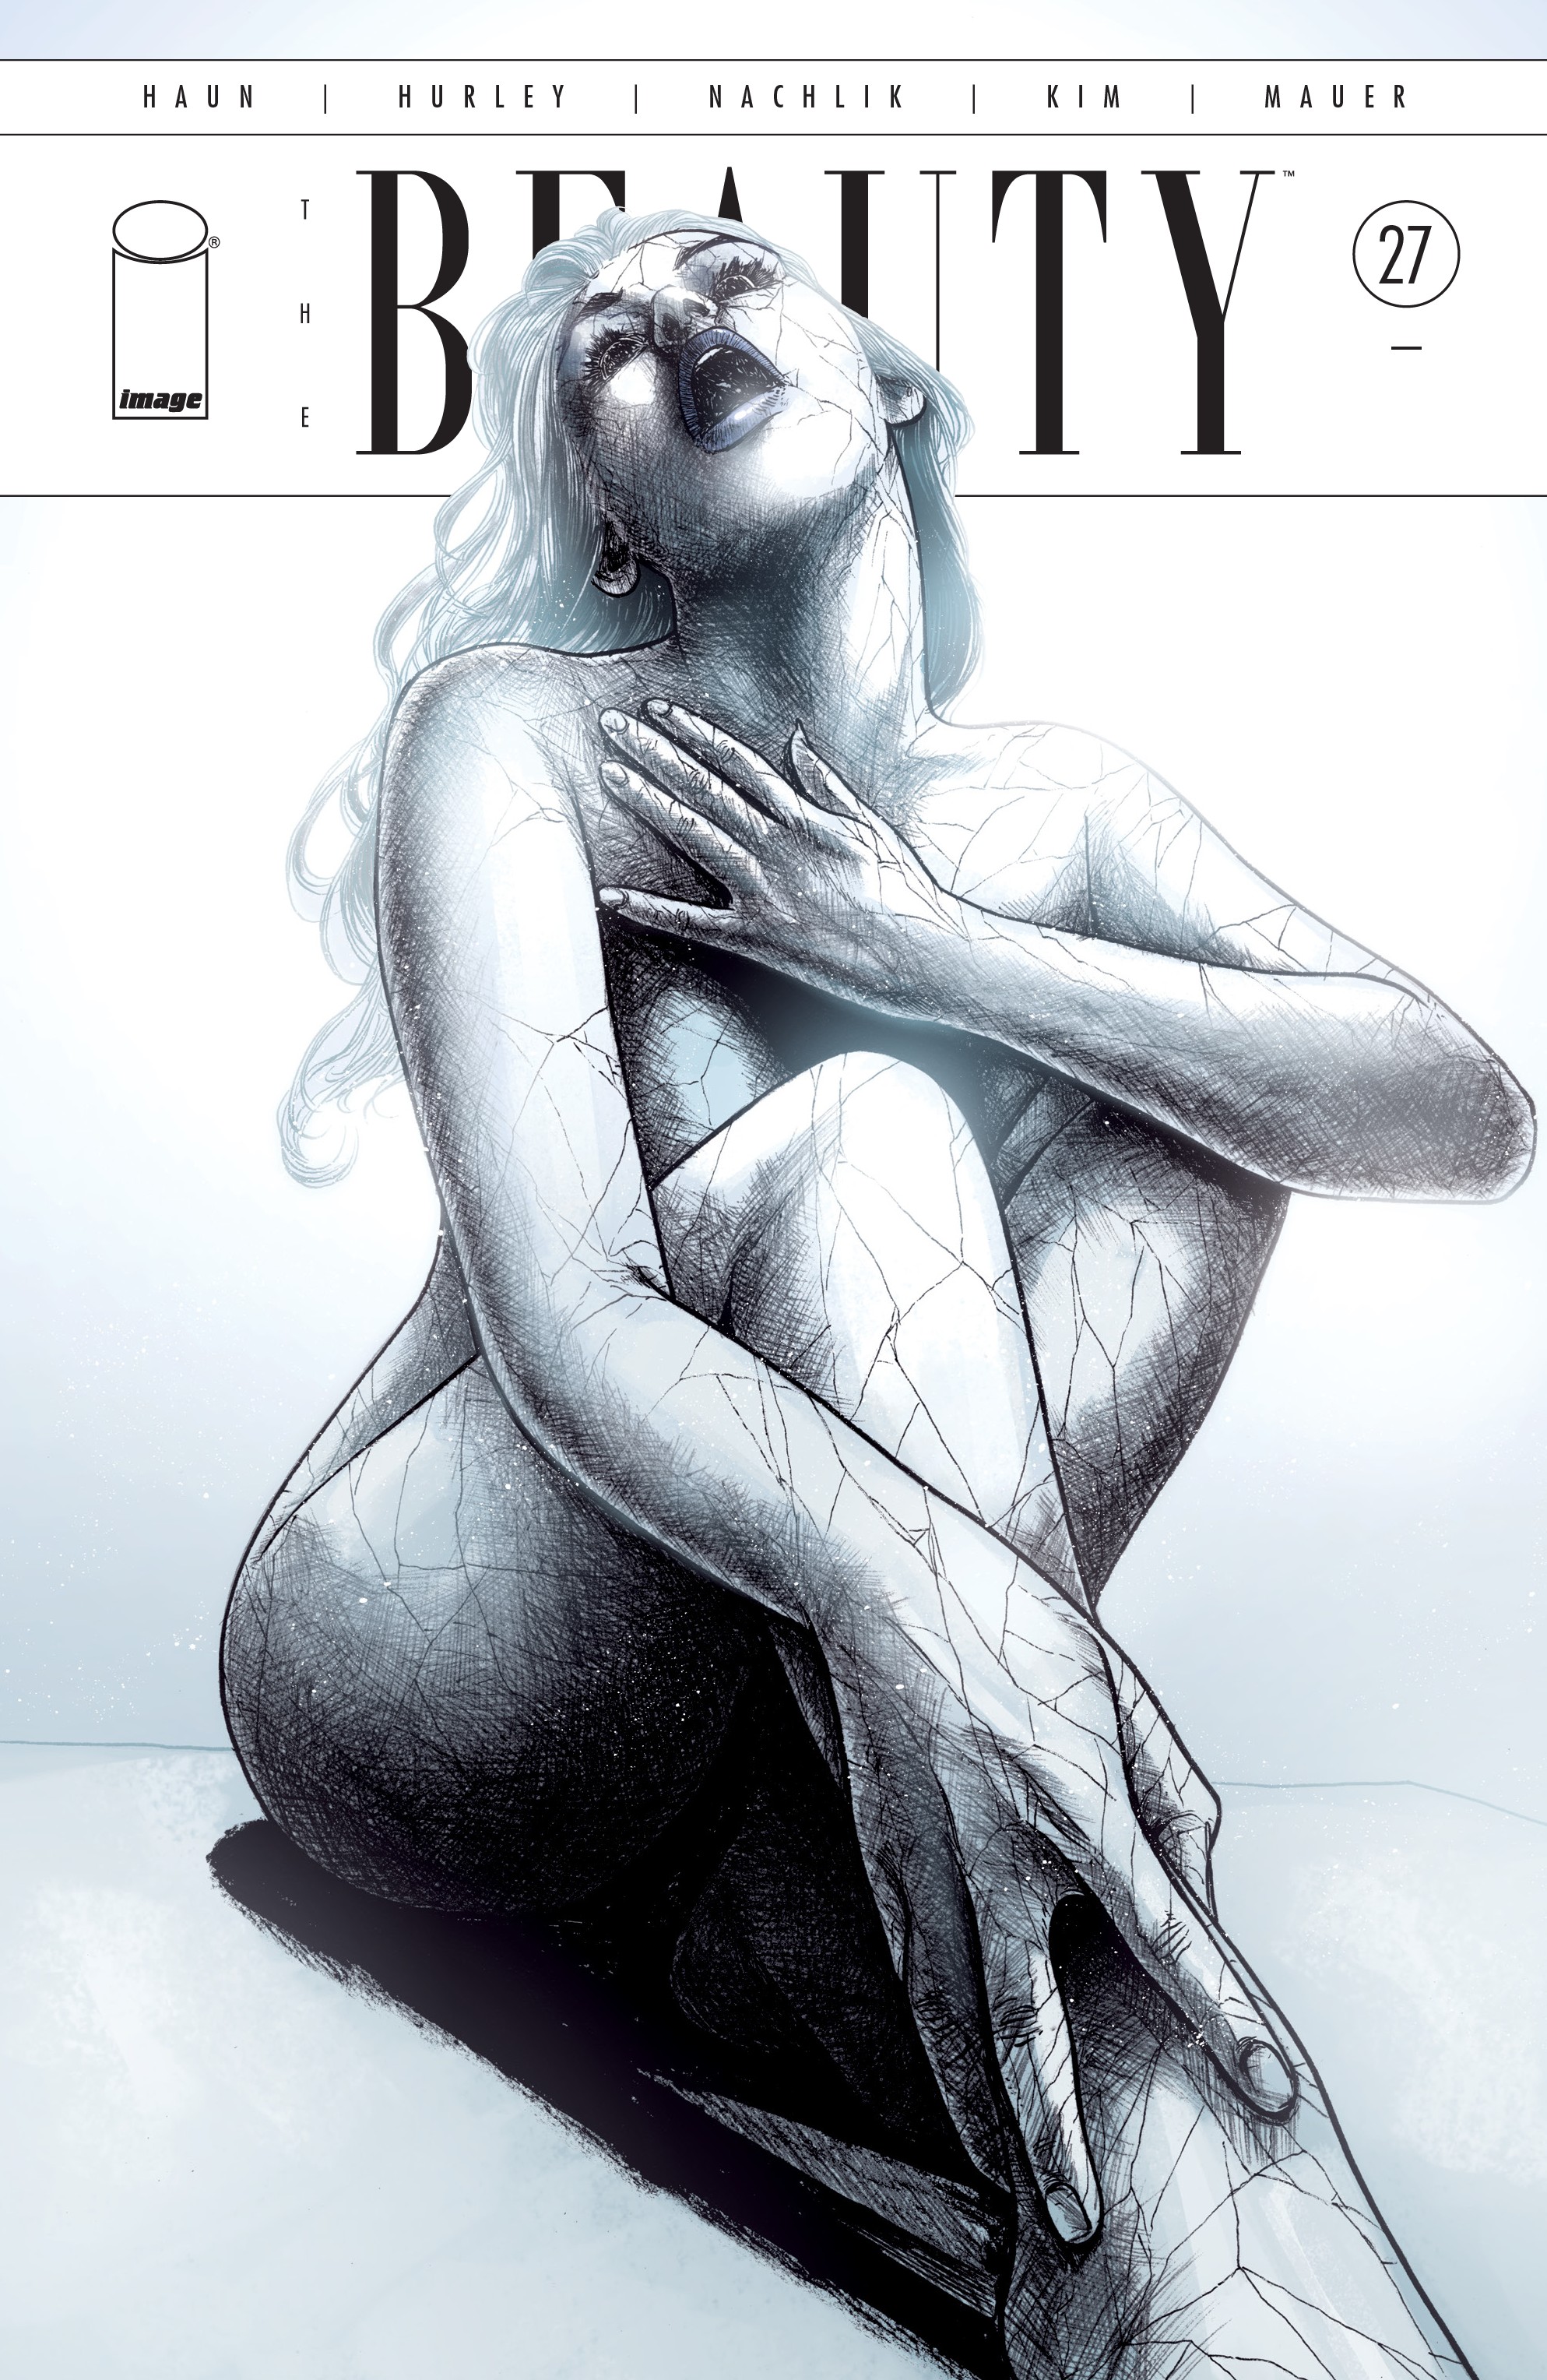 Read online The Beauty comic -  Issue #27 - 1